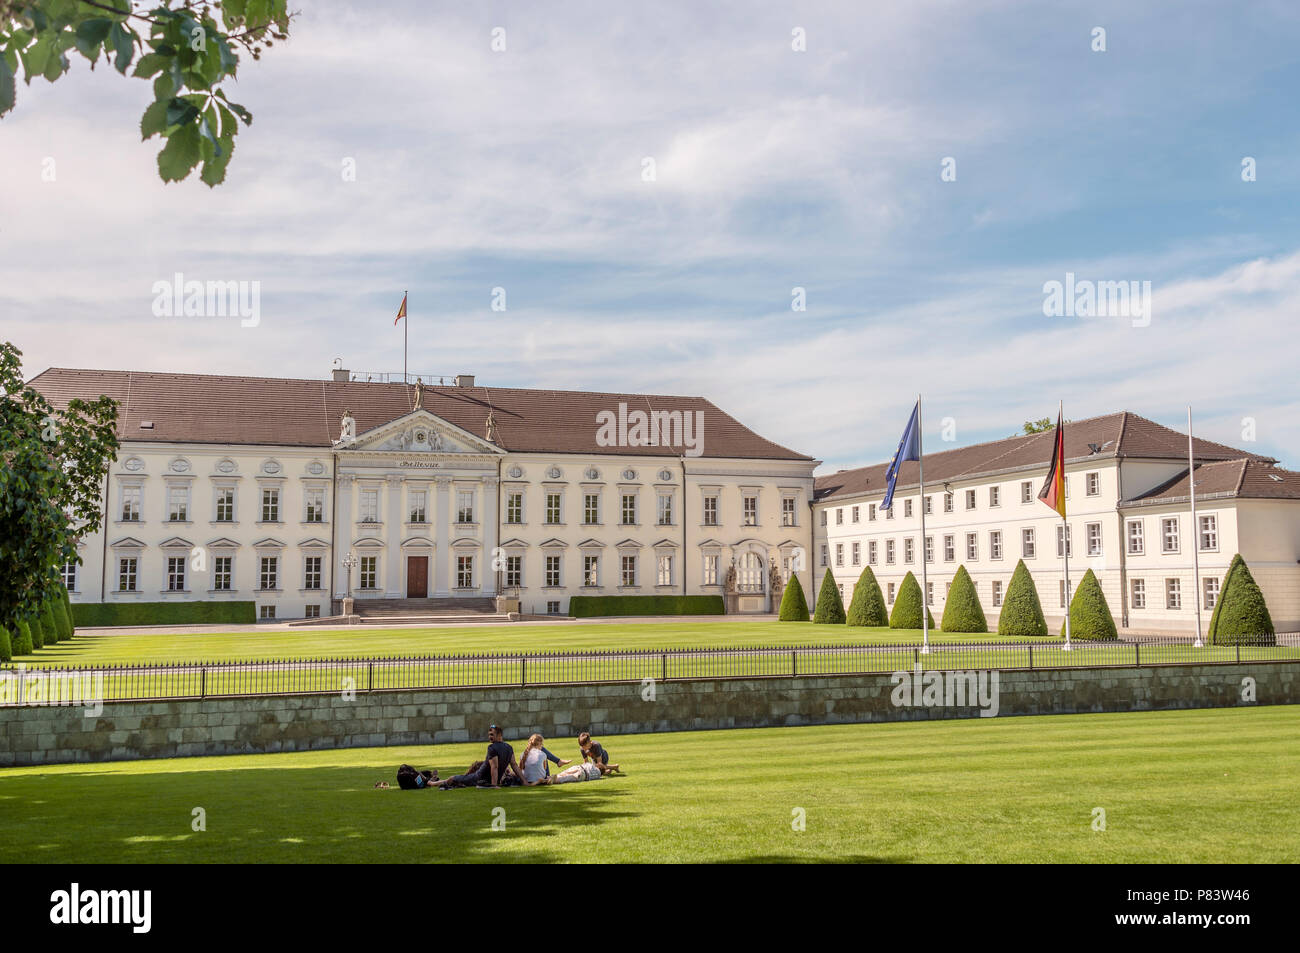 Bellevue Palace, the residence of the German federal president, Berlin, Germany Stock Photo